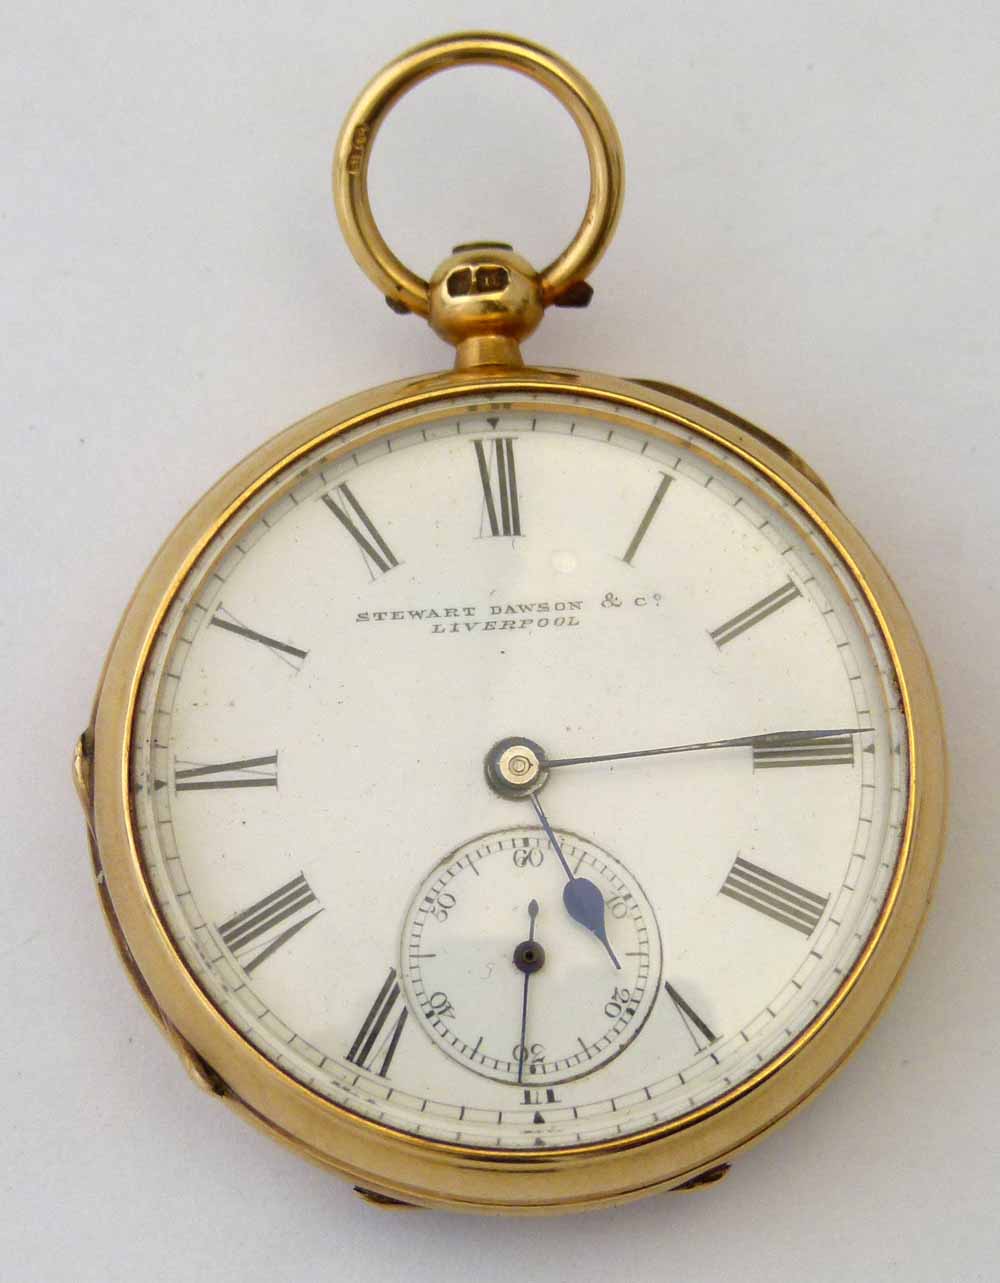 18ct gold open faced fob watch by Stewart Lawson & Co, Liverpool, case Birmingham 1891, 36mm,